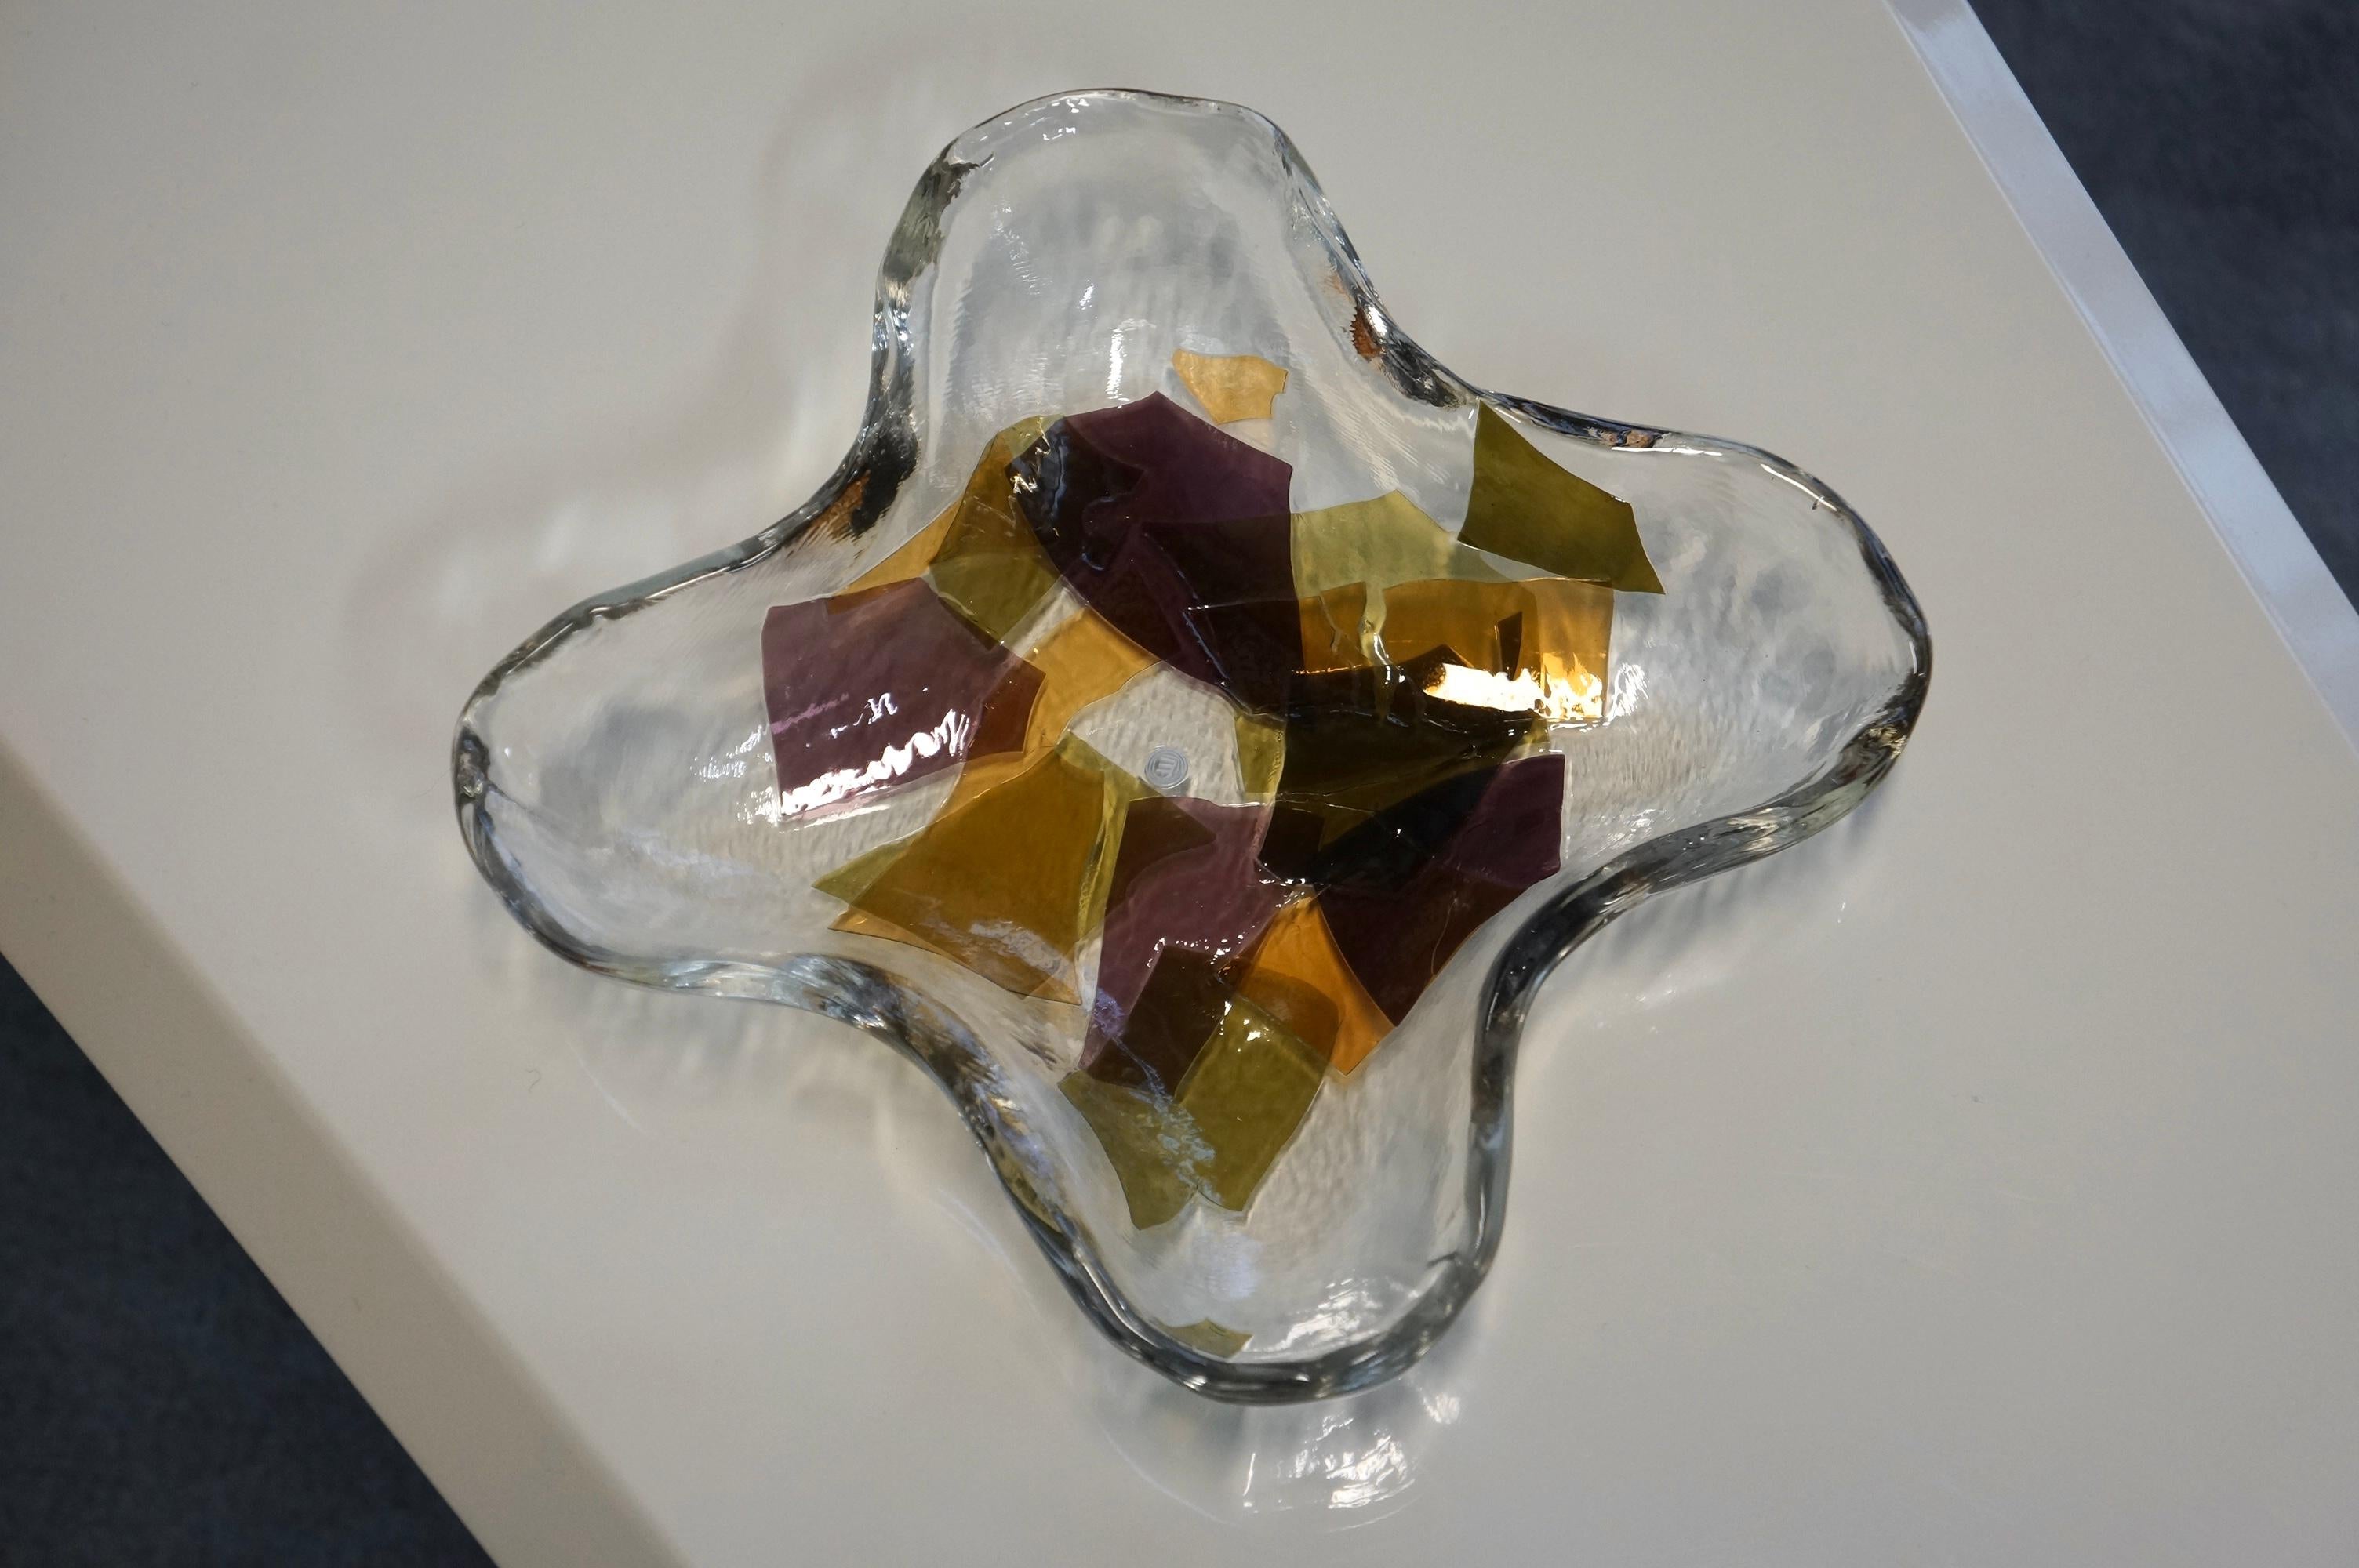 Stunning original ‘La Murrina’ decorative Murano Art glass dish featuring coloured glass. The clear art glass has a pinched and symmetrical shape. It is enriched with thin layers of coloured art glass fragments varying from yellow to purple. The